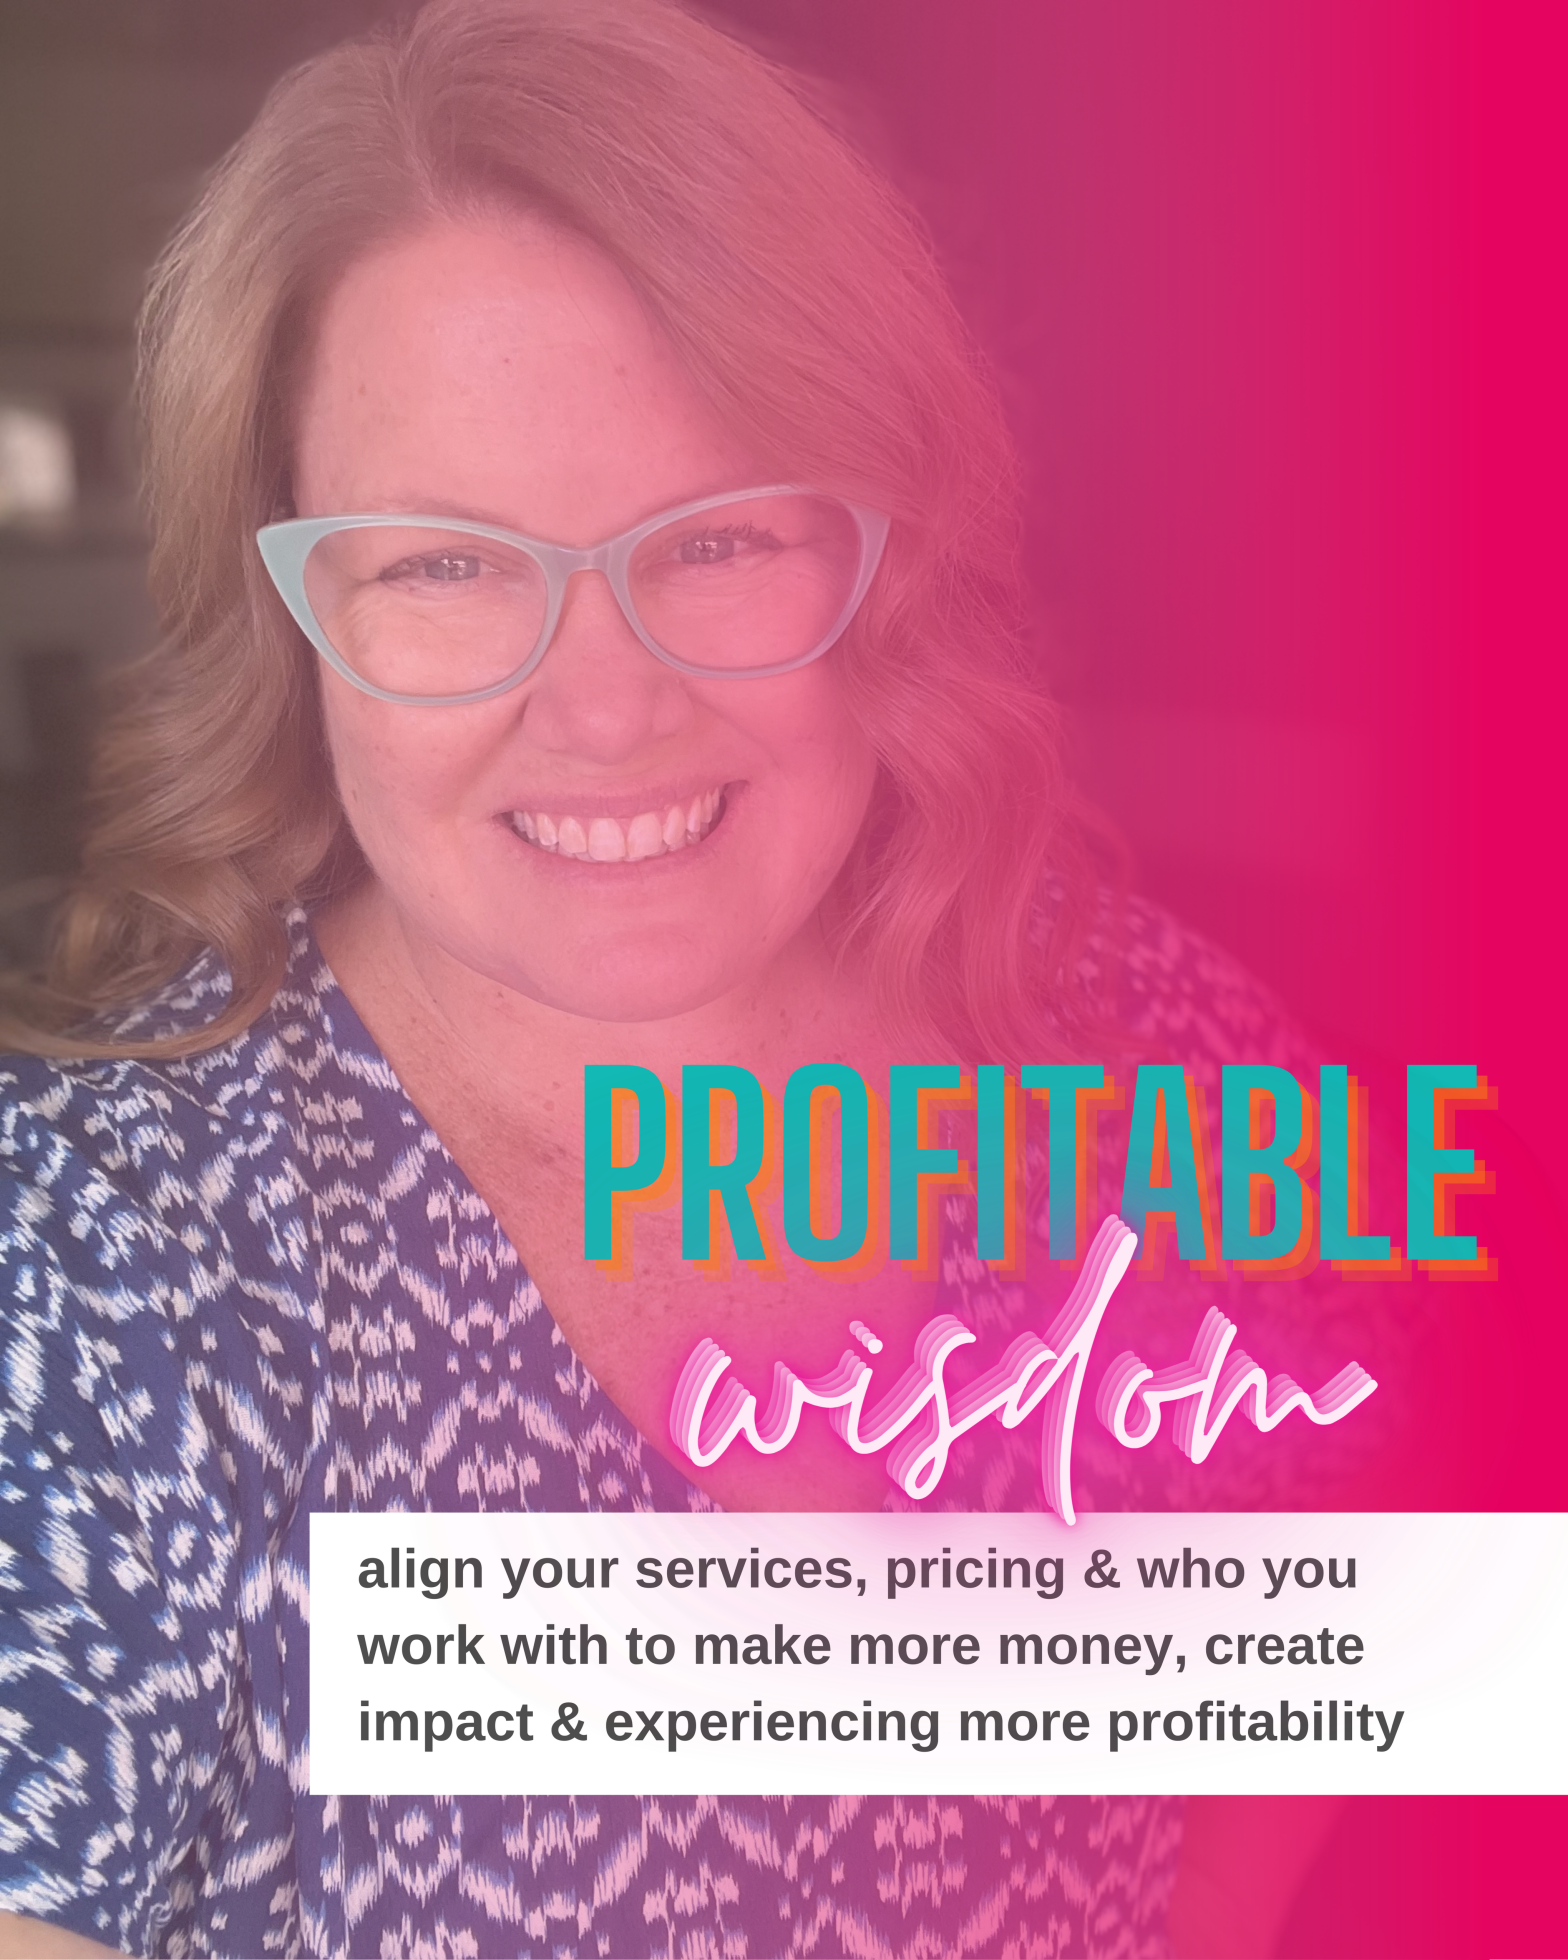 Profitable Wisdom Group Coaching Mastermind for women in business | Perth Western Australia | Business coaching | Shannon Dunn | Thrive Factor Archetypes | Leadership Archetypes